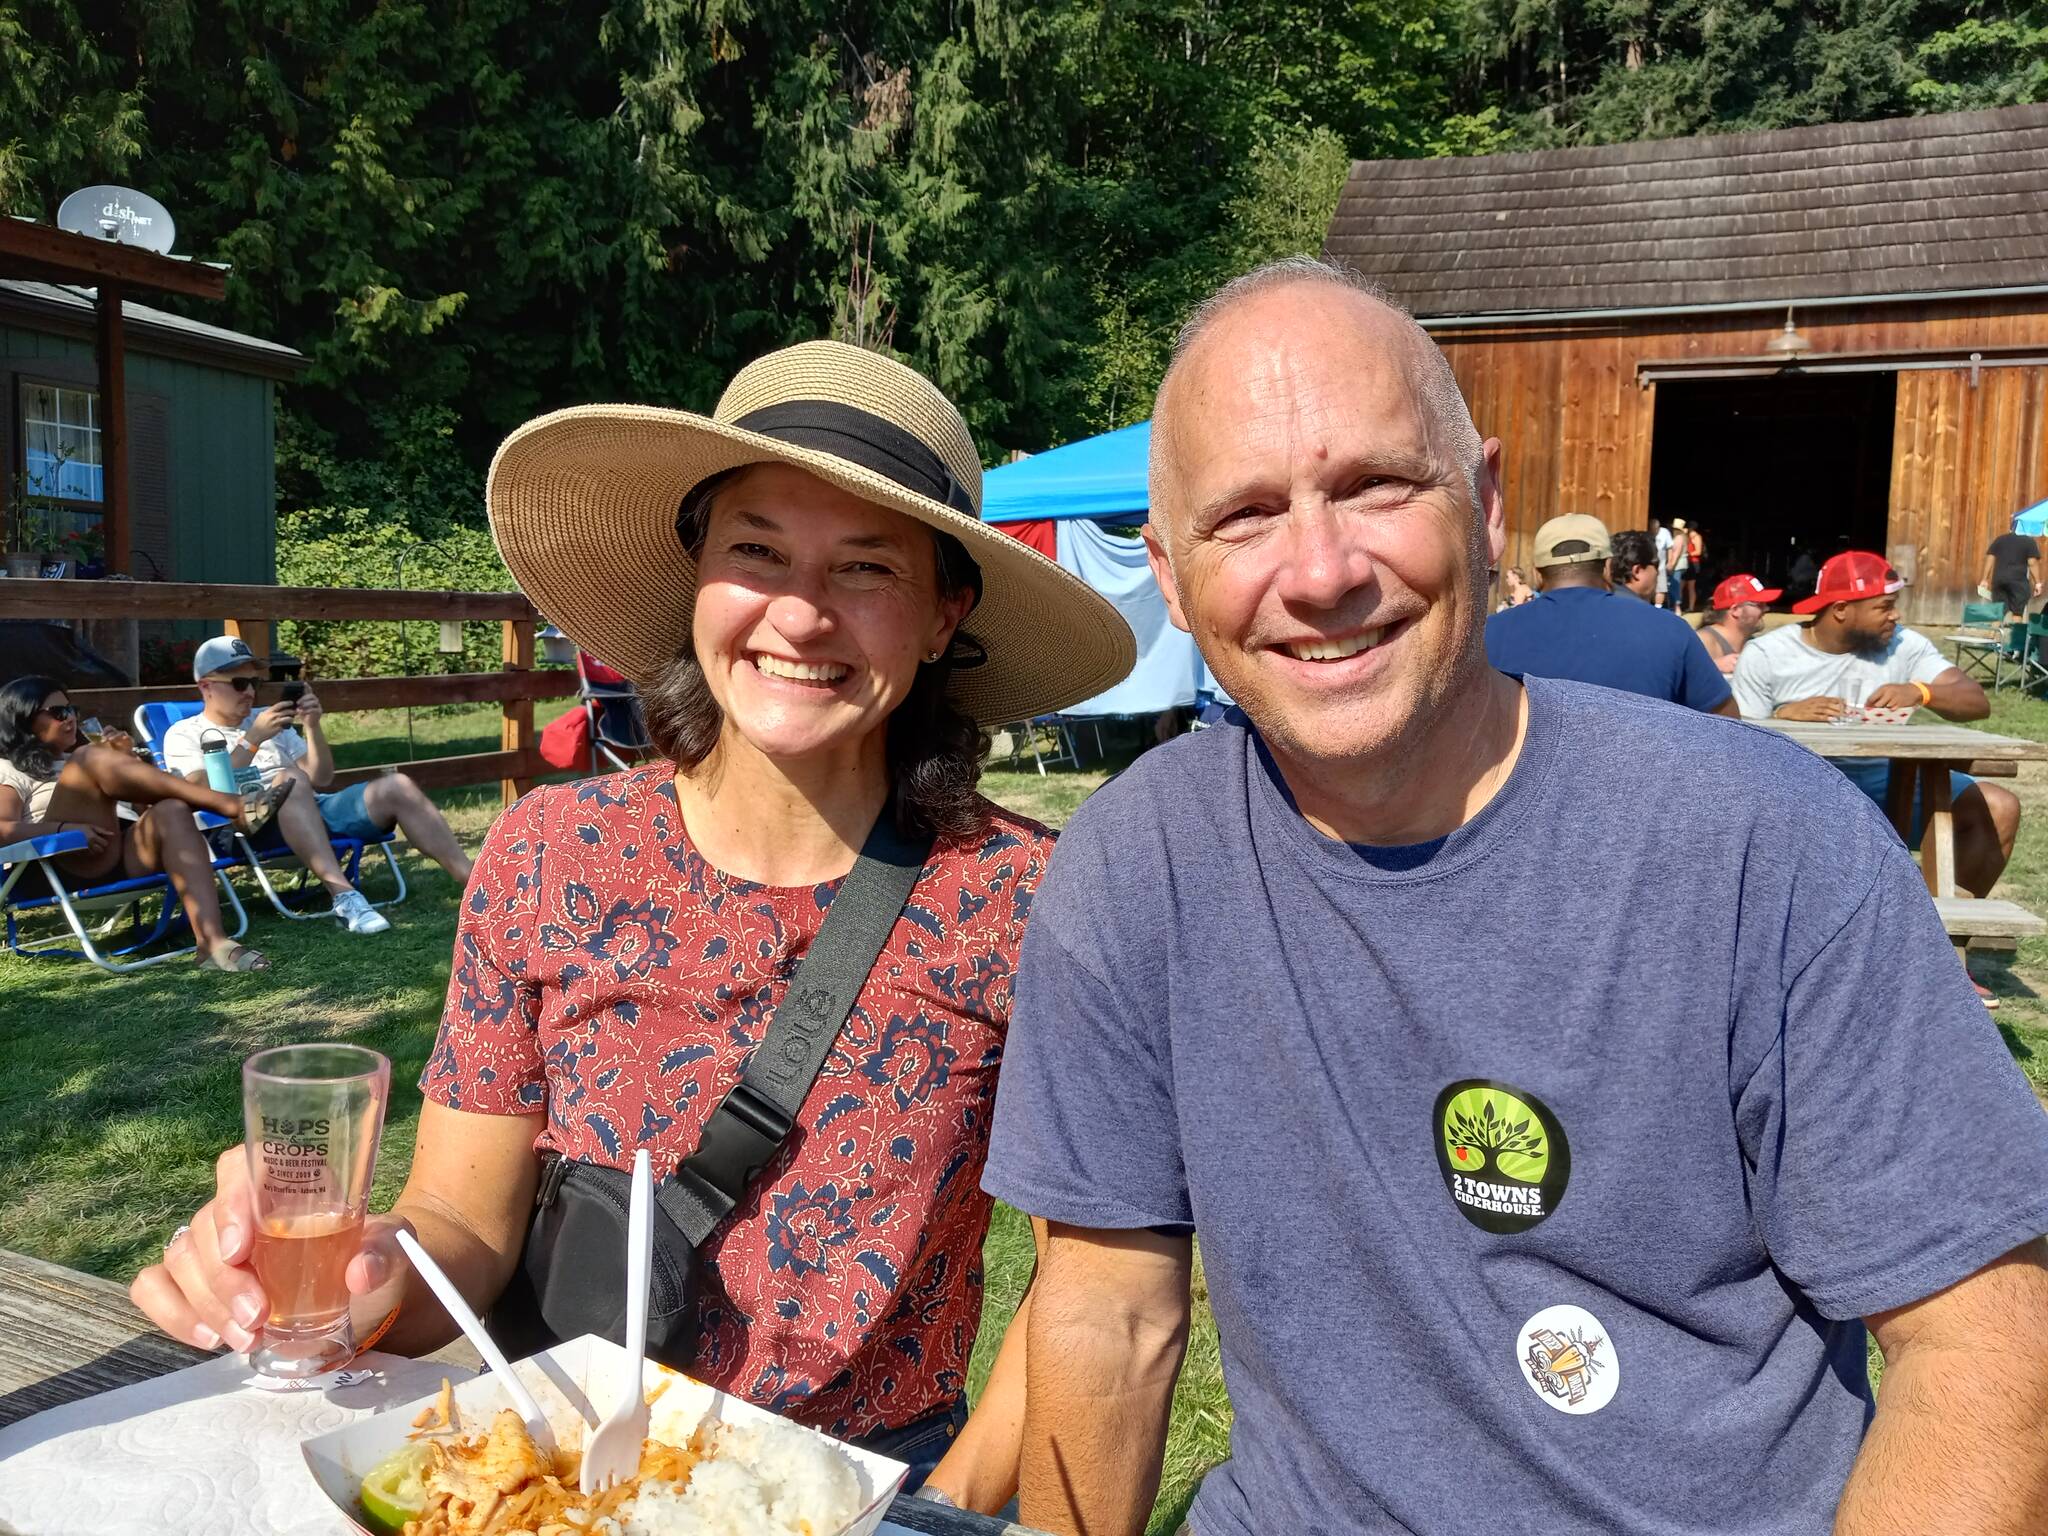 Under a cloudless sky, Angie and Jay Anderson kick back with a sampling of their favorite suds at Auburn’s annual Hops and Crops Festival at Mary Olson Farm on Saturday, Sept. 16.